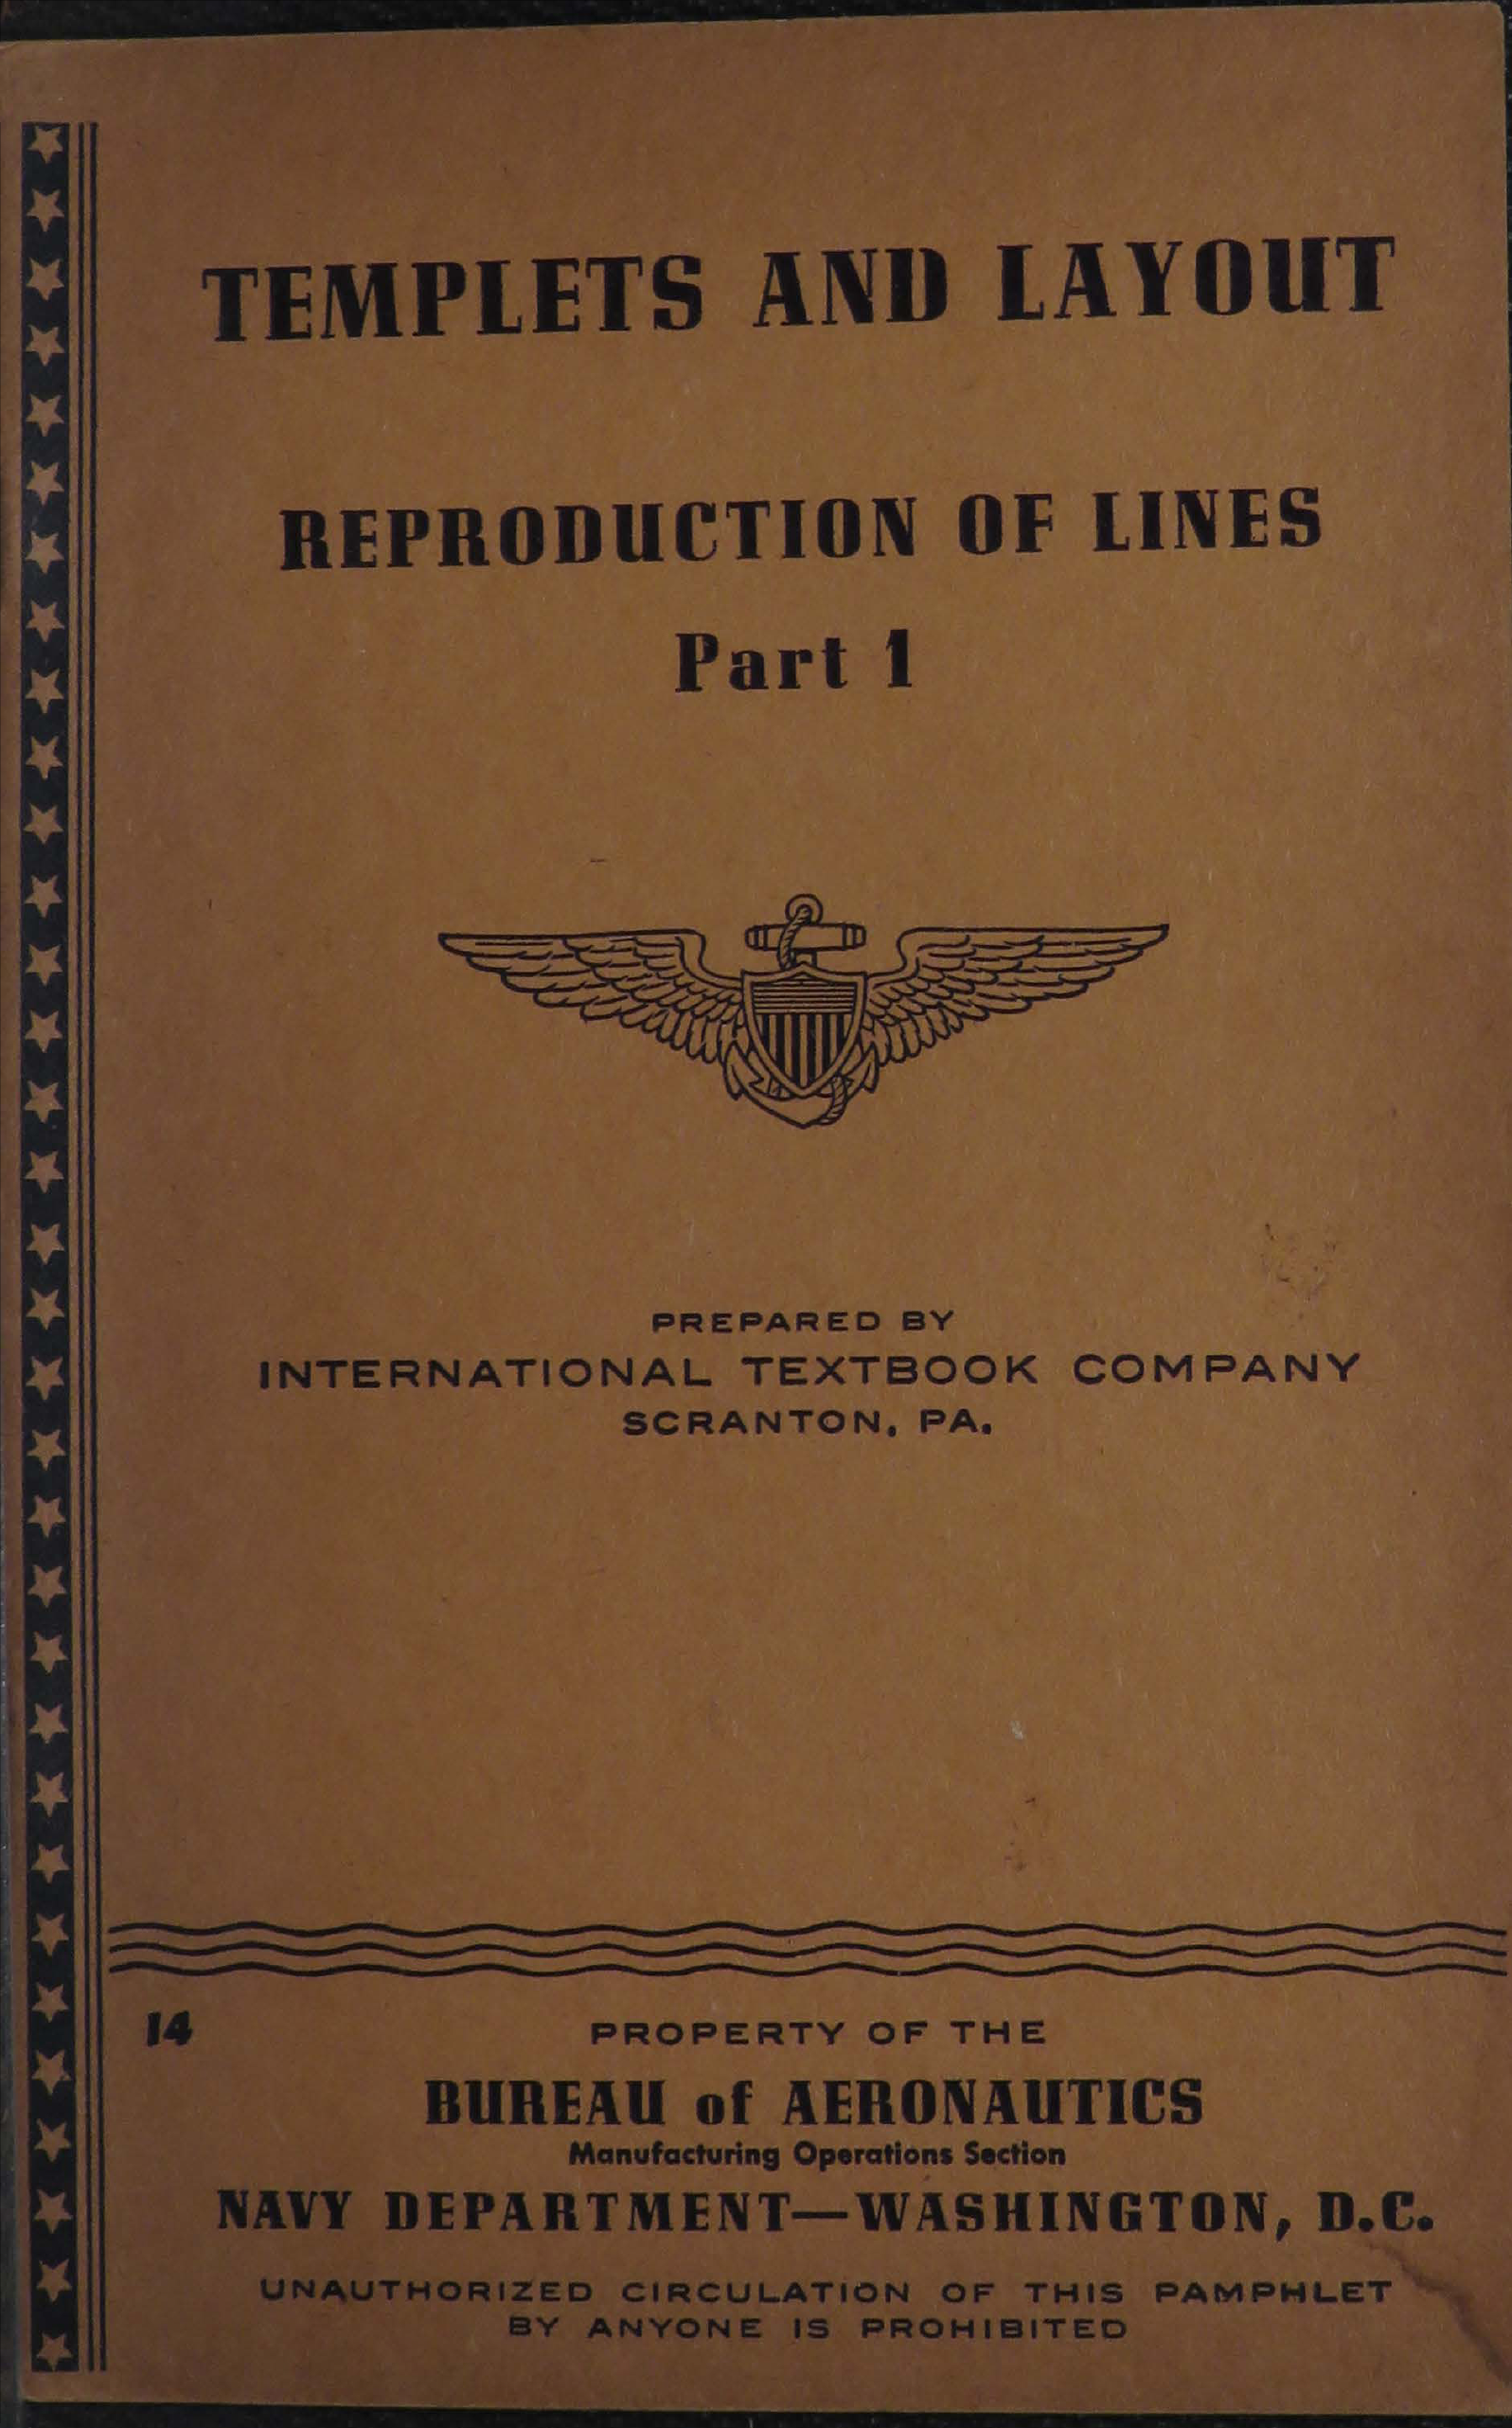 Sample page 1 from AirCorps Library document: Templets and Layouts for Reproduction of Lines Part 1 - Bureau of Aeronautics